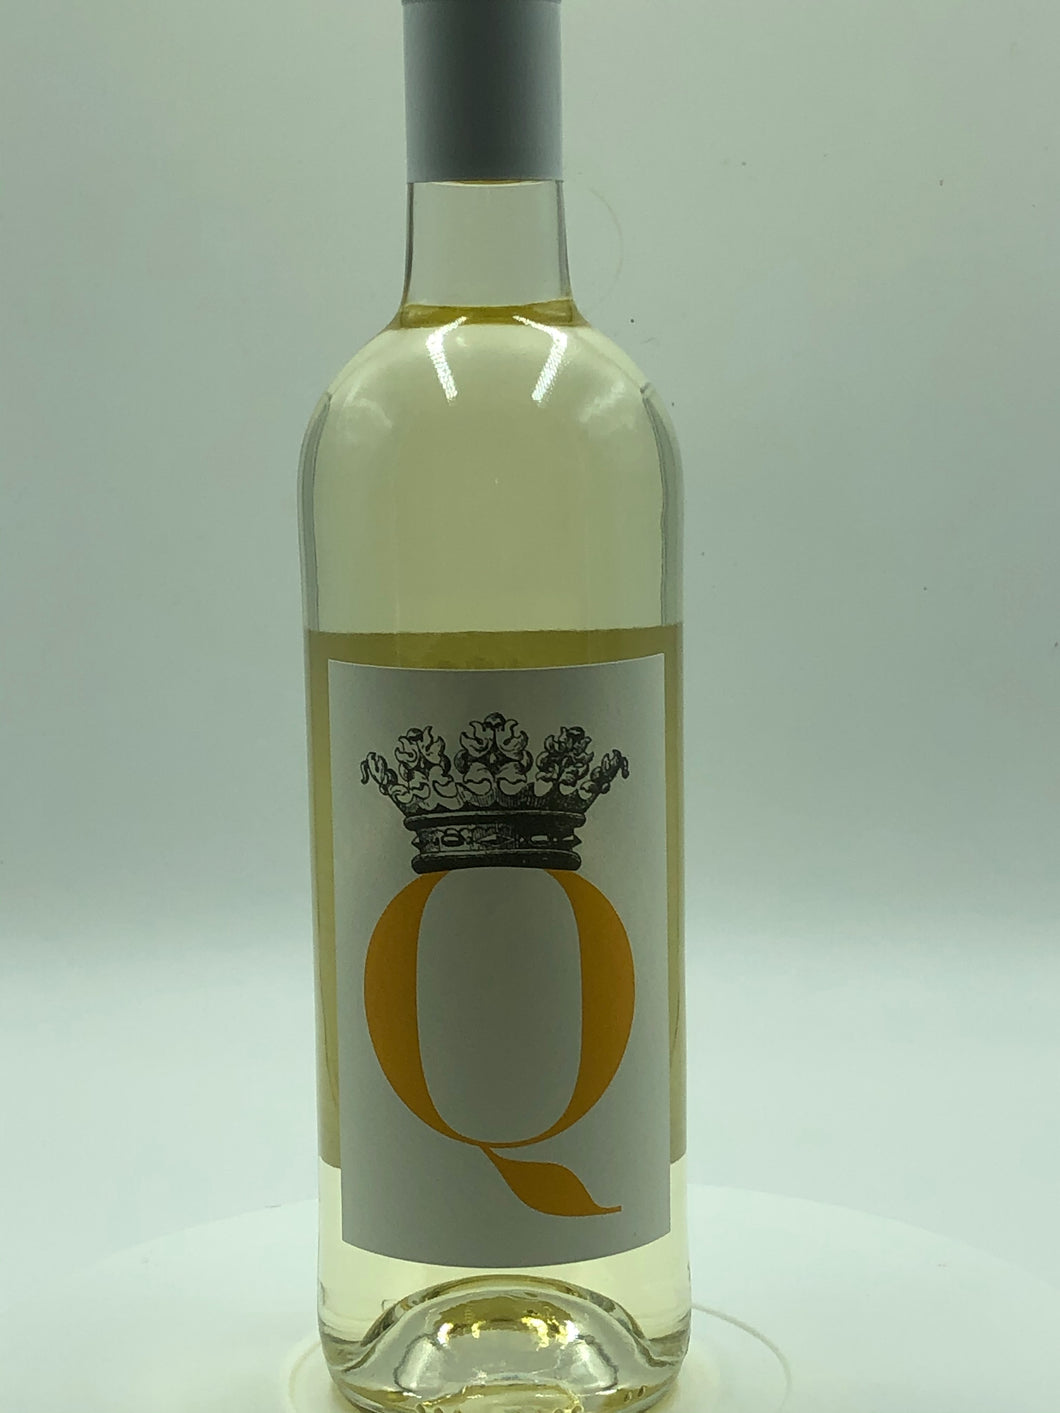 Tousey Winery “Queen of Clermont”